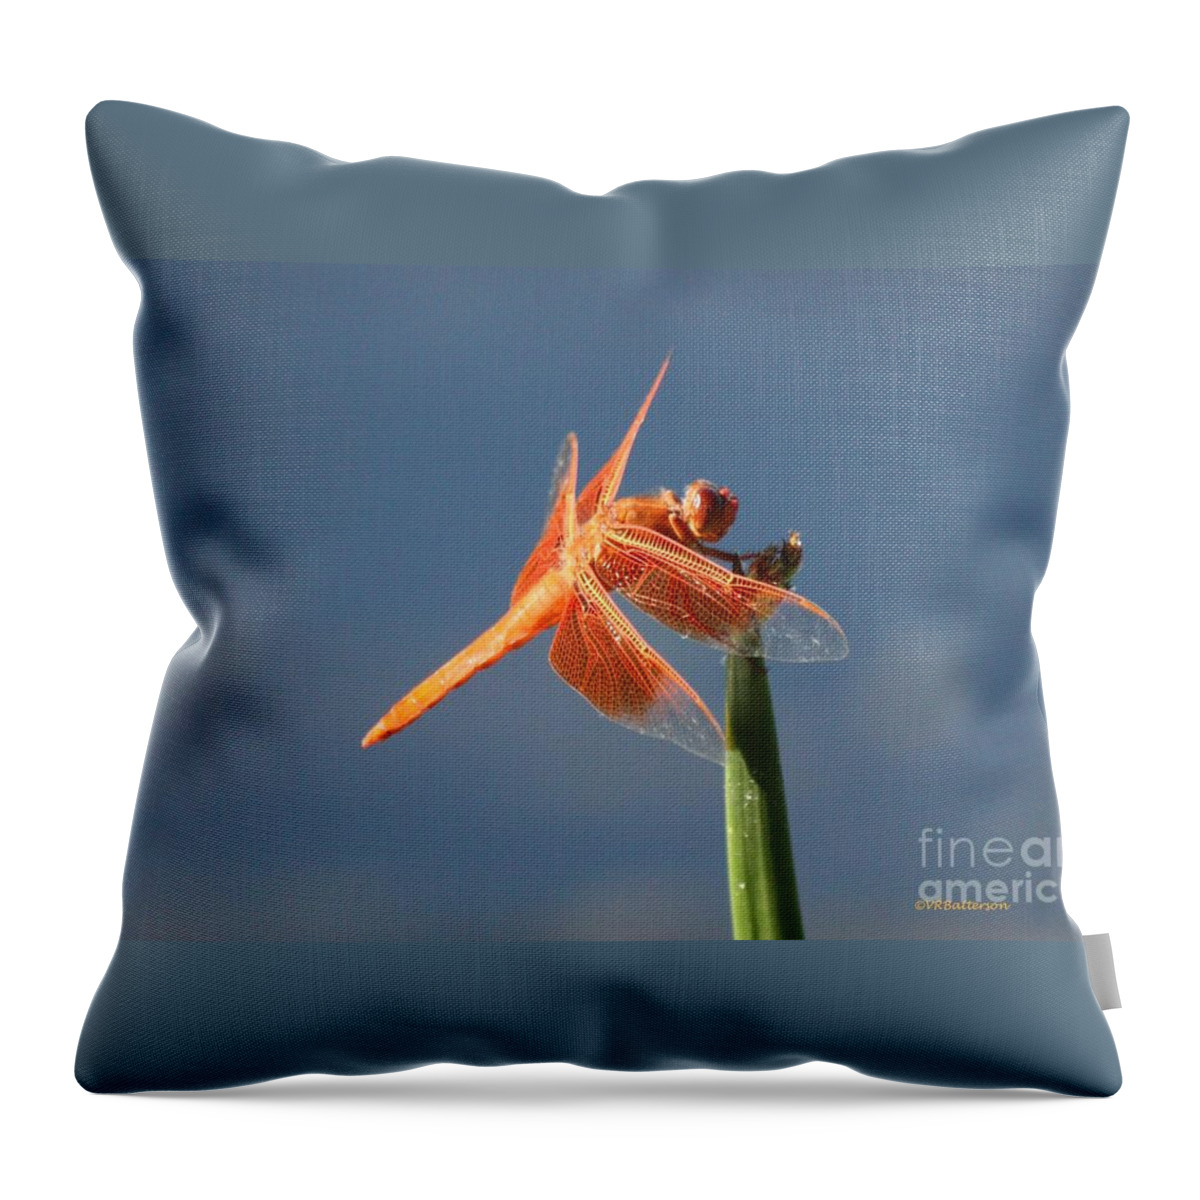 Dragonfly Throw Pillow featuring the photograph Orange Dragonfly on Blue by Veronica Batterson